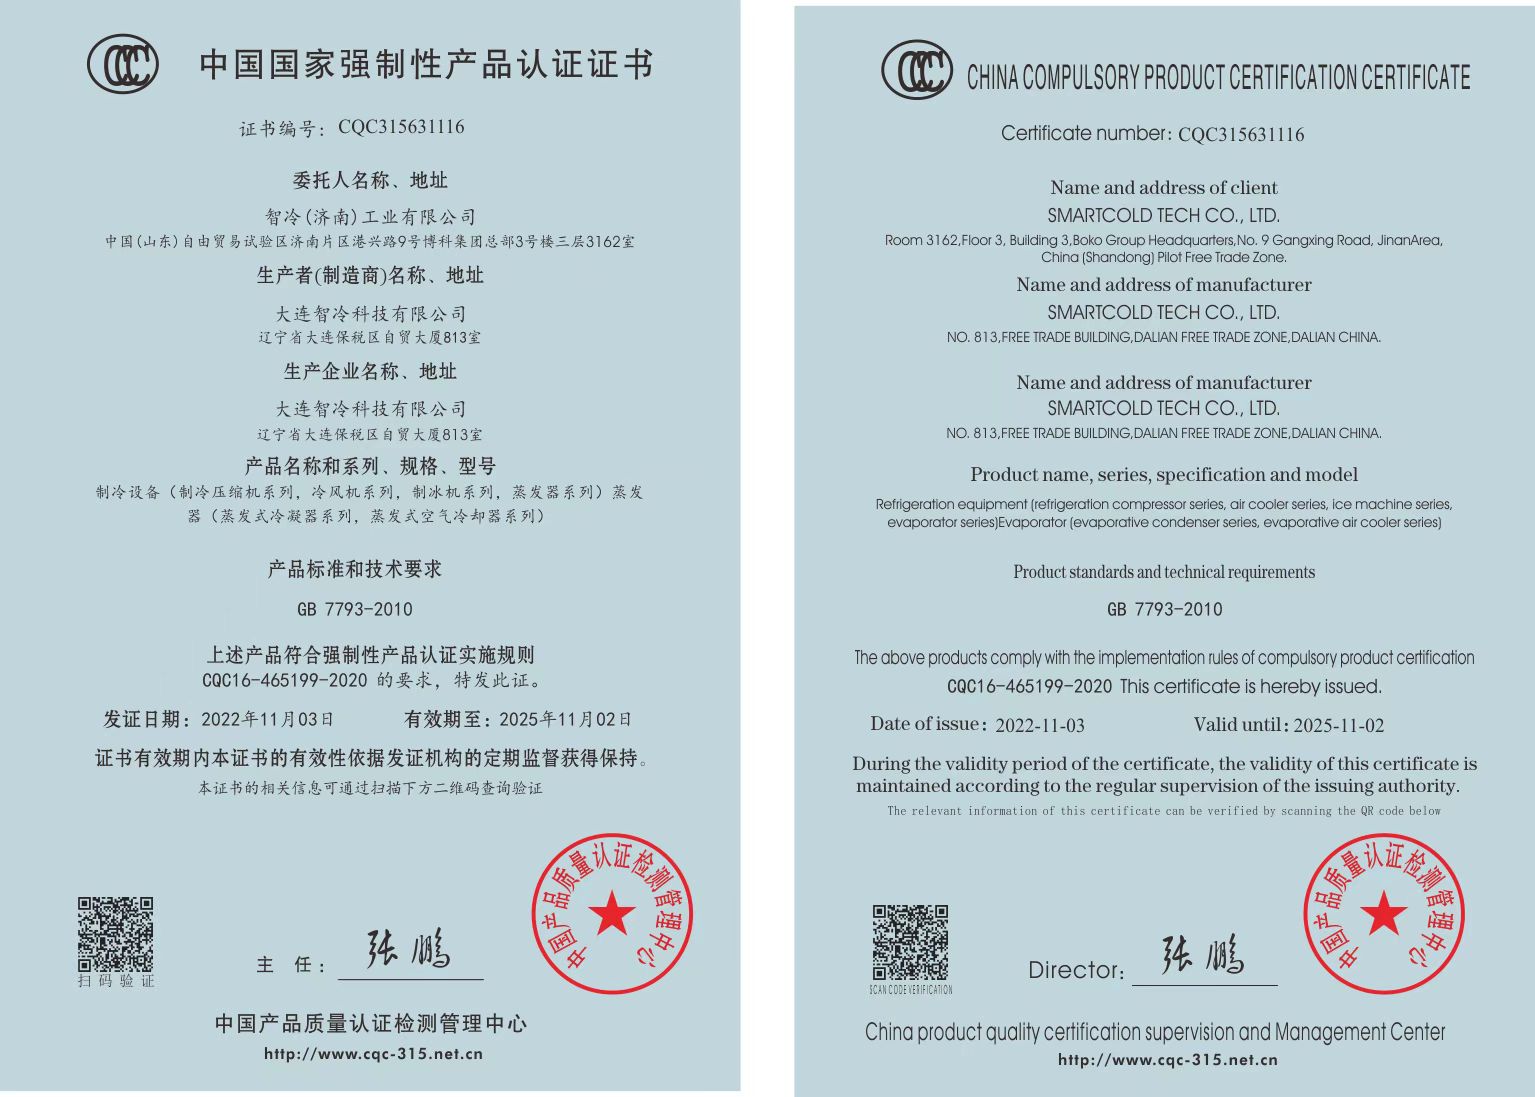 CHINA COMPULSORY PRODUCT CERTIFICATION CERTIFICATE